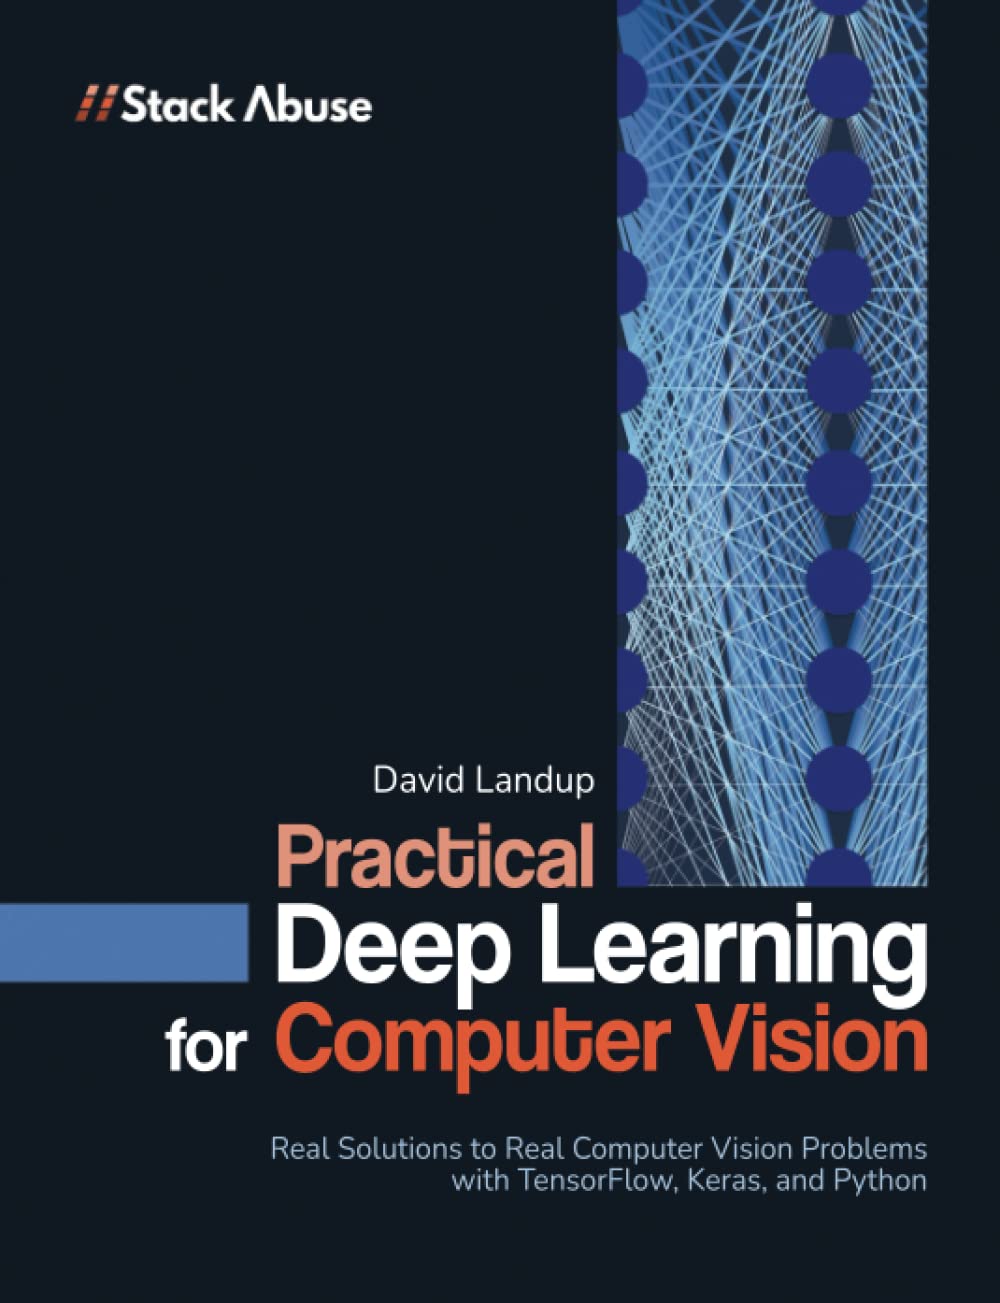 Practical Deep Learning for Computer Vision with Python (Paperback)